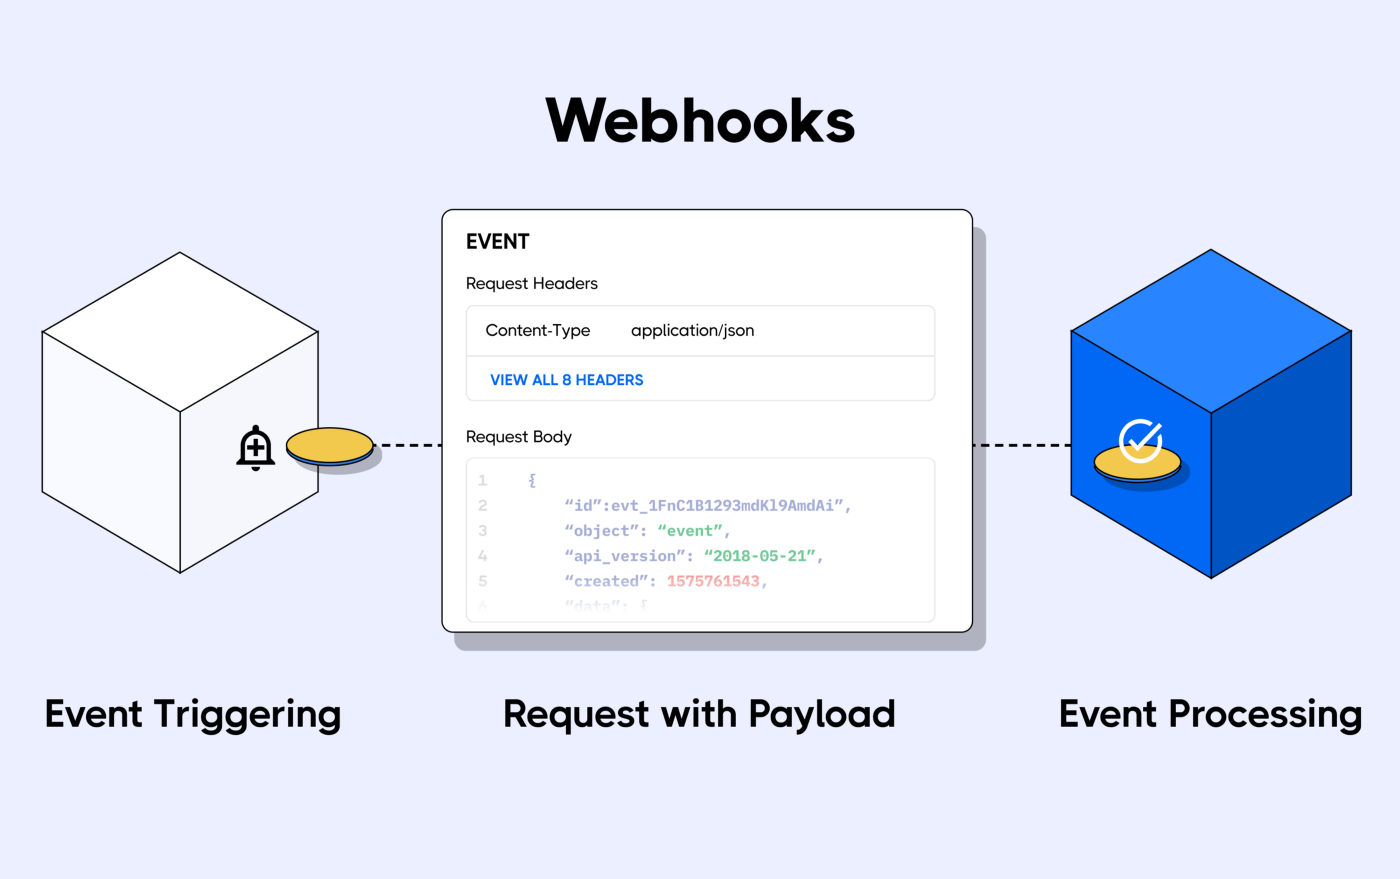 Sequence of an Ethereum webhooks starting at Event Triggering, going to Request with Payload, and ending at Event Processing.